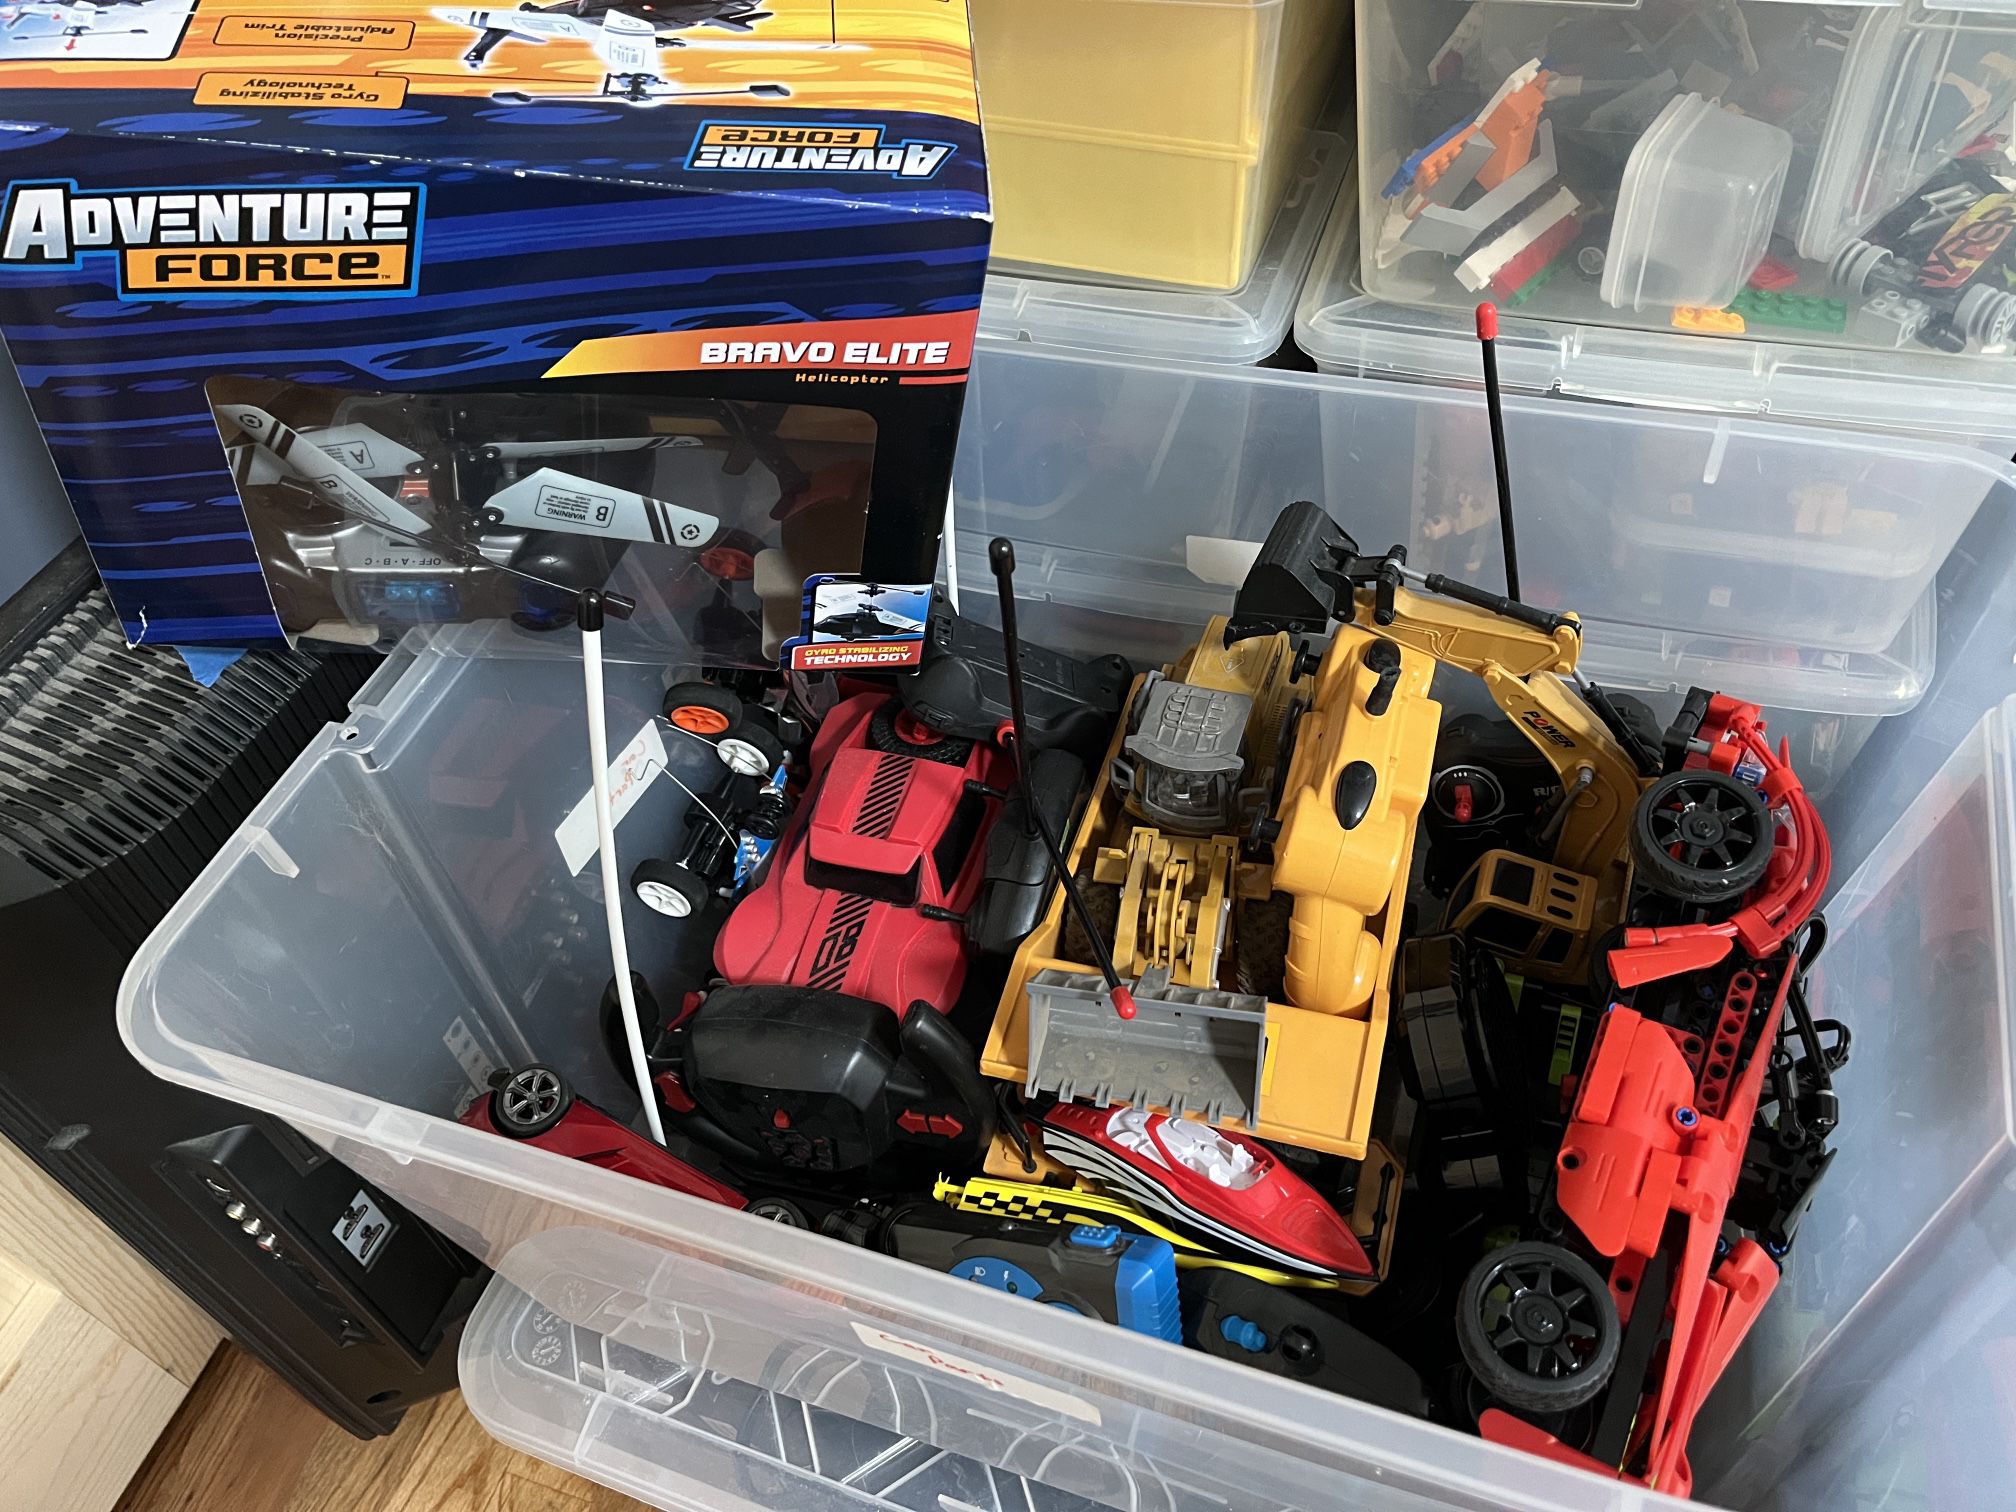 Box Of RC toys - All have Controls & All Work Great!! Like New! Super Super Cheap!!